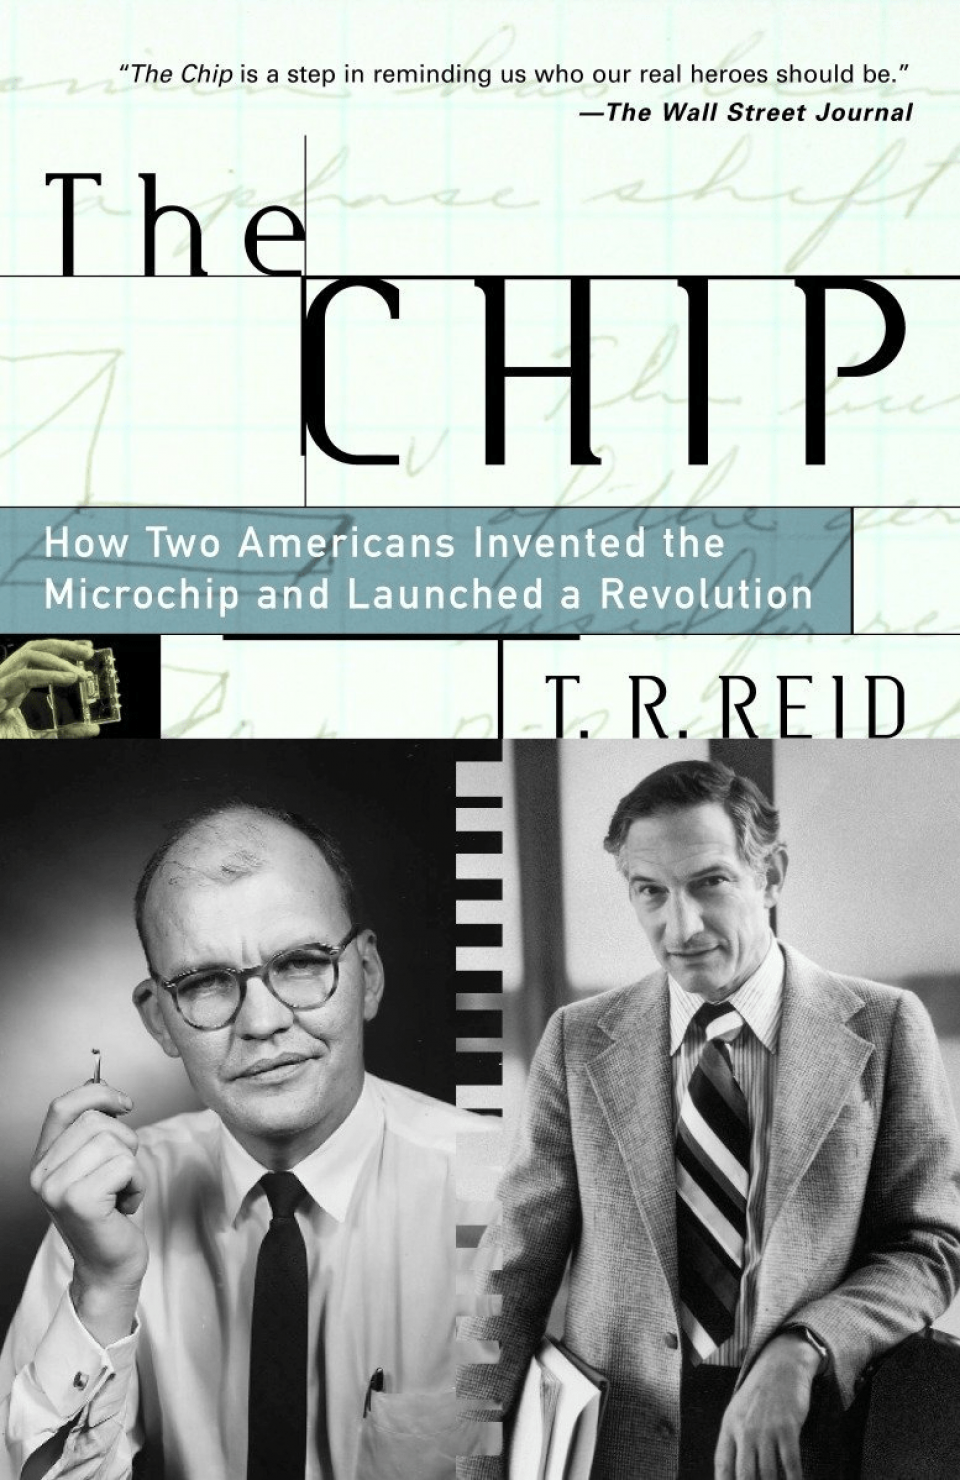 Image of the Chip Book